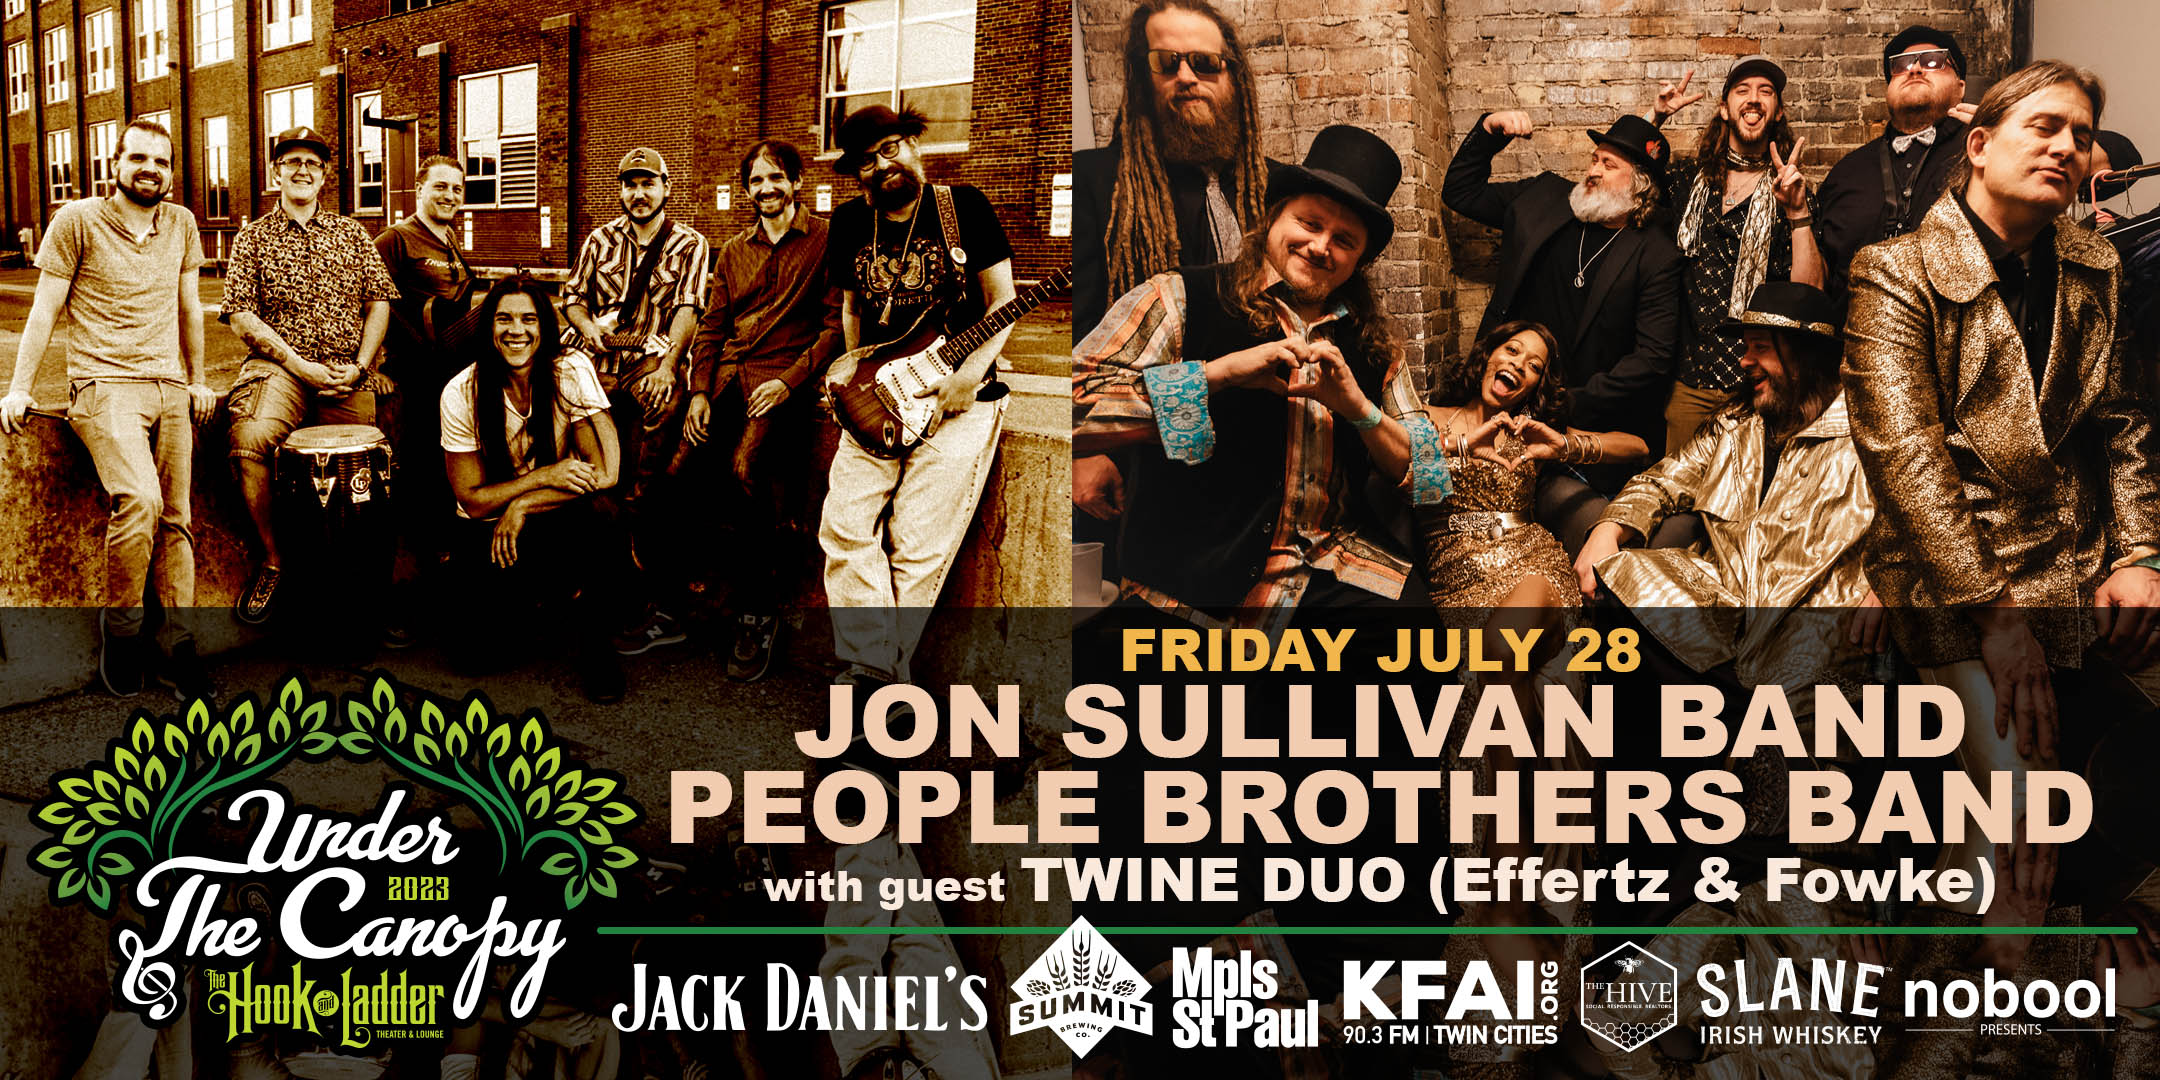 Jon Sullivan Band / People Brothers Band with special guests Twine Duo (Will Effertz & Kevin Fowke) Friday, July 28 Under The Canopy at The Hook and Ladder Theater "An Urban Outdoor Summer Concert Series" Doors 6:00pm :: Music 7:00pm :: 21+ GA: $20 ADV / $25 DOS